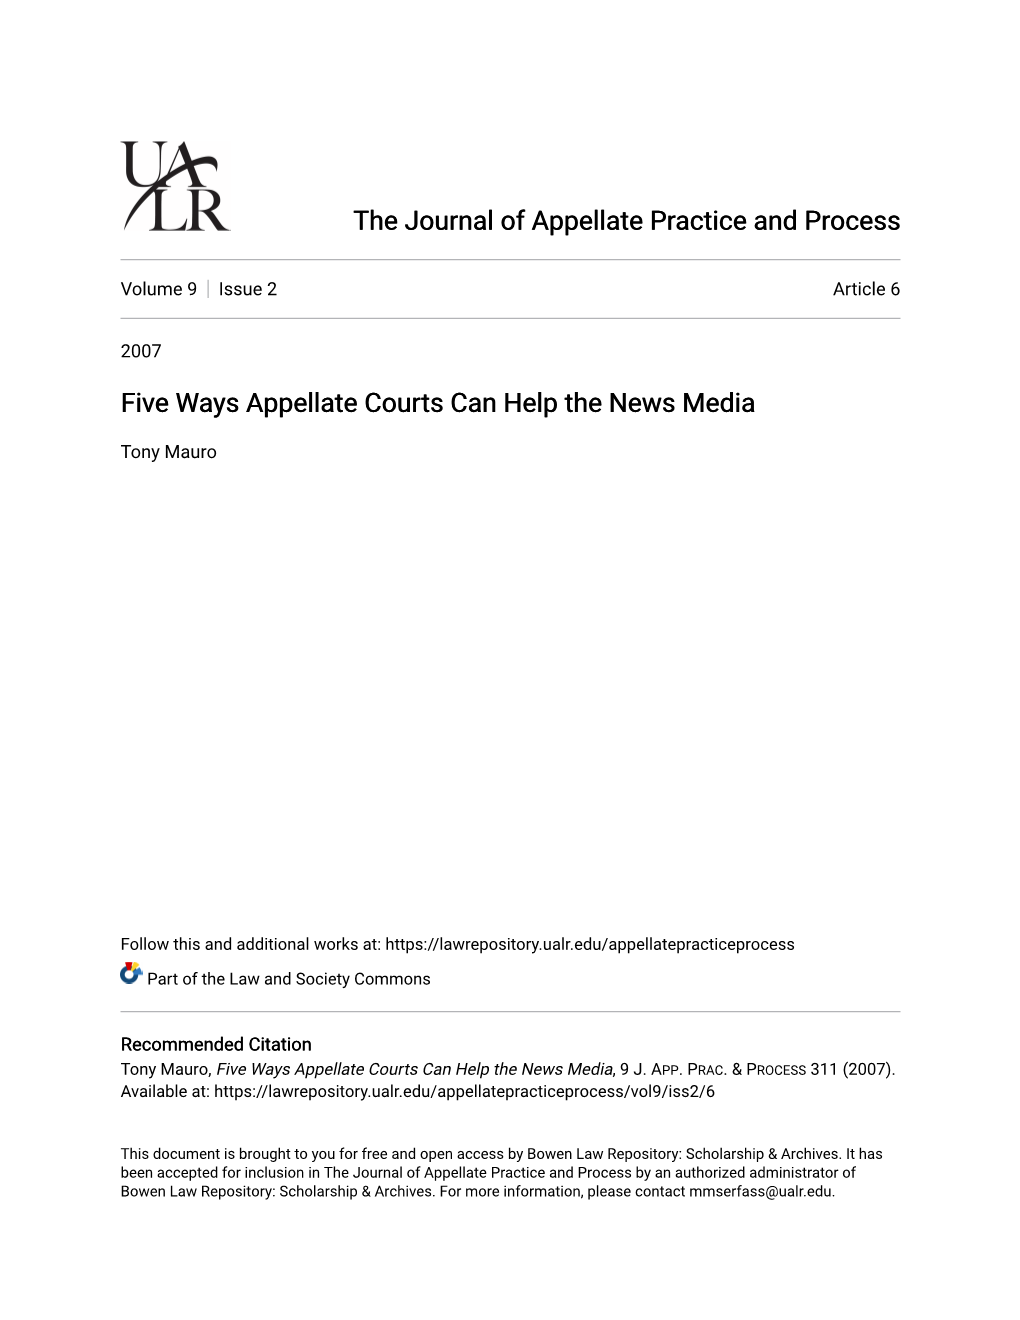 Five Ways Appellate Courts Can Help the News Media